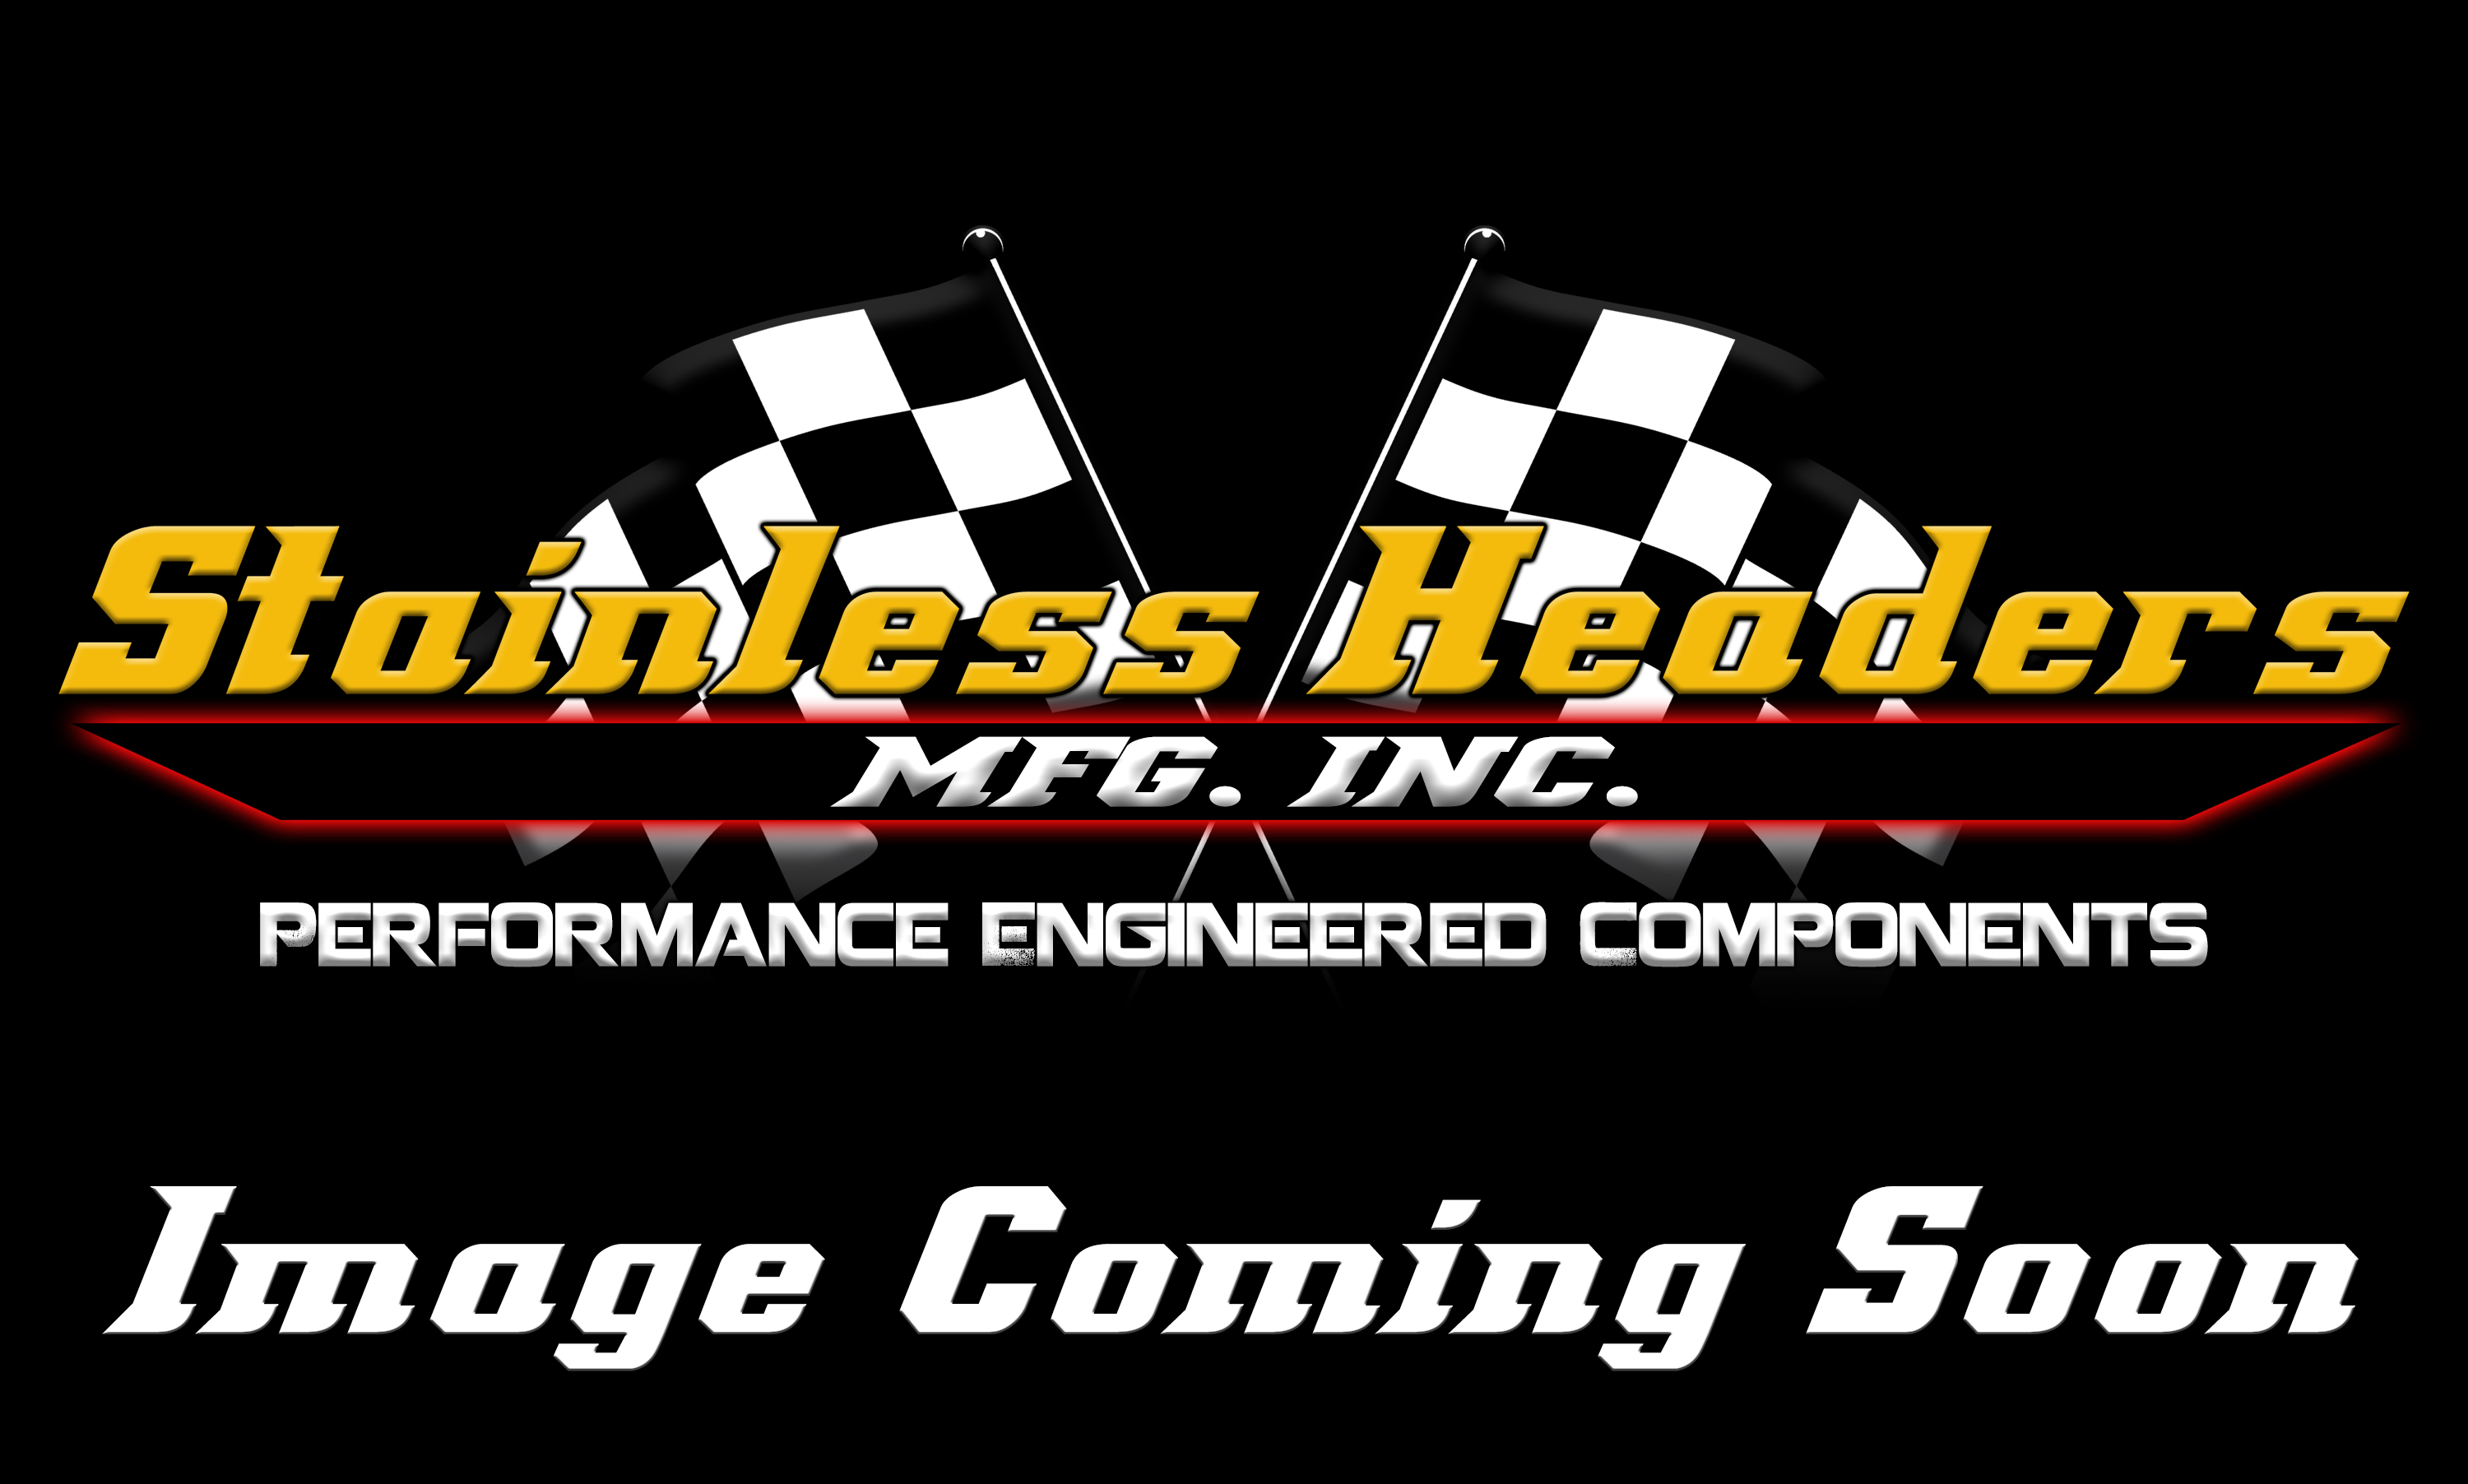 Stainless Headers - 2 3/8" Primary 8 into 1 Performance Merge Collector-16ga 321ss - Image 3